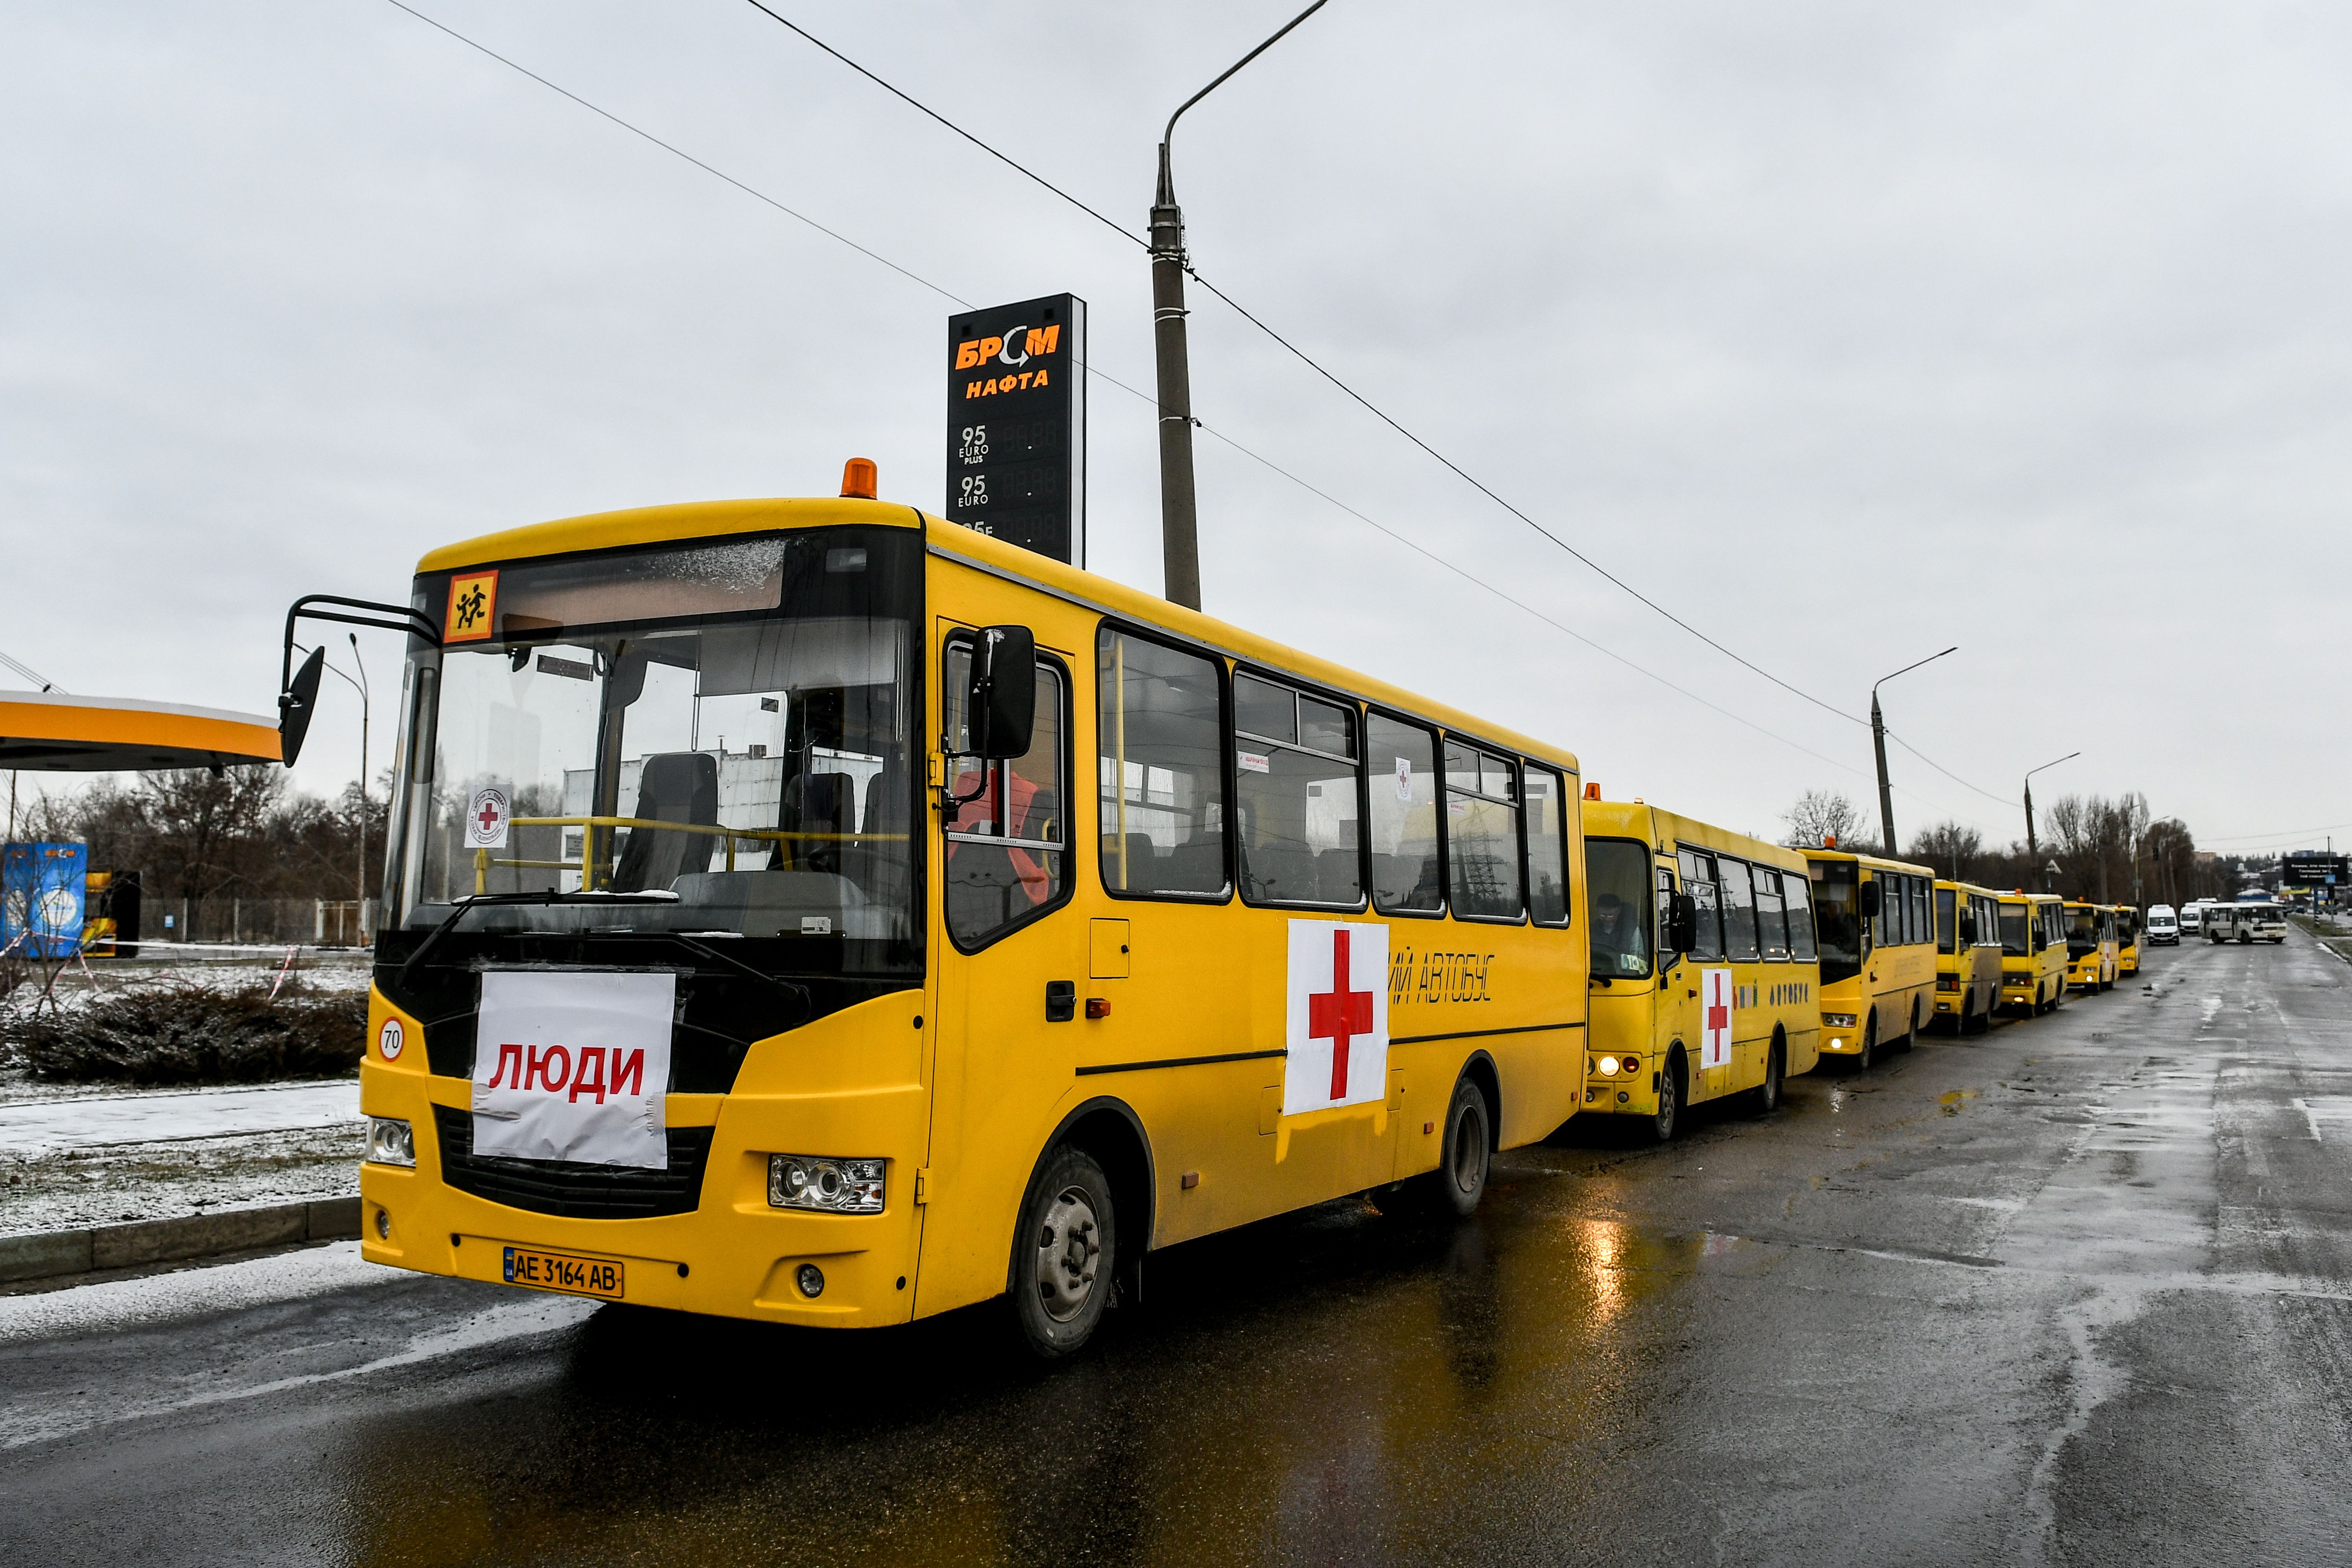 A convoy of buses featuring red crosses is set to take off for besieged Mariupol to deliver humanitarian aid and evacuate people on March 6.